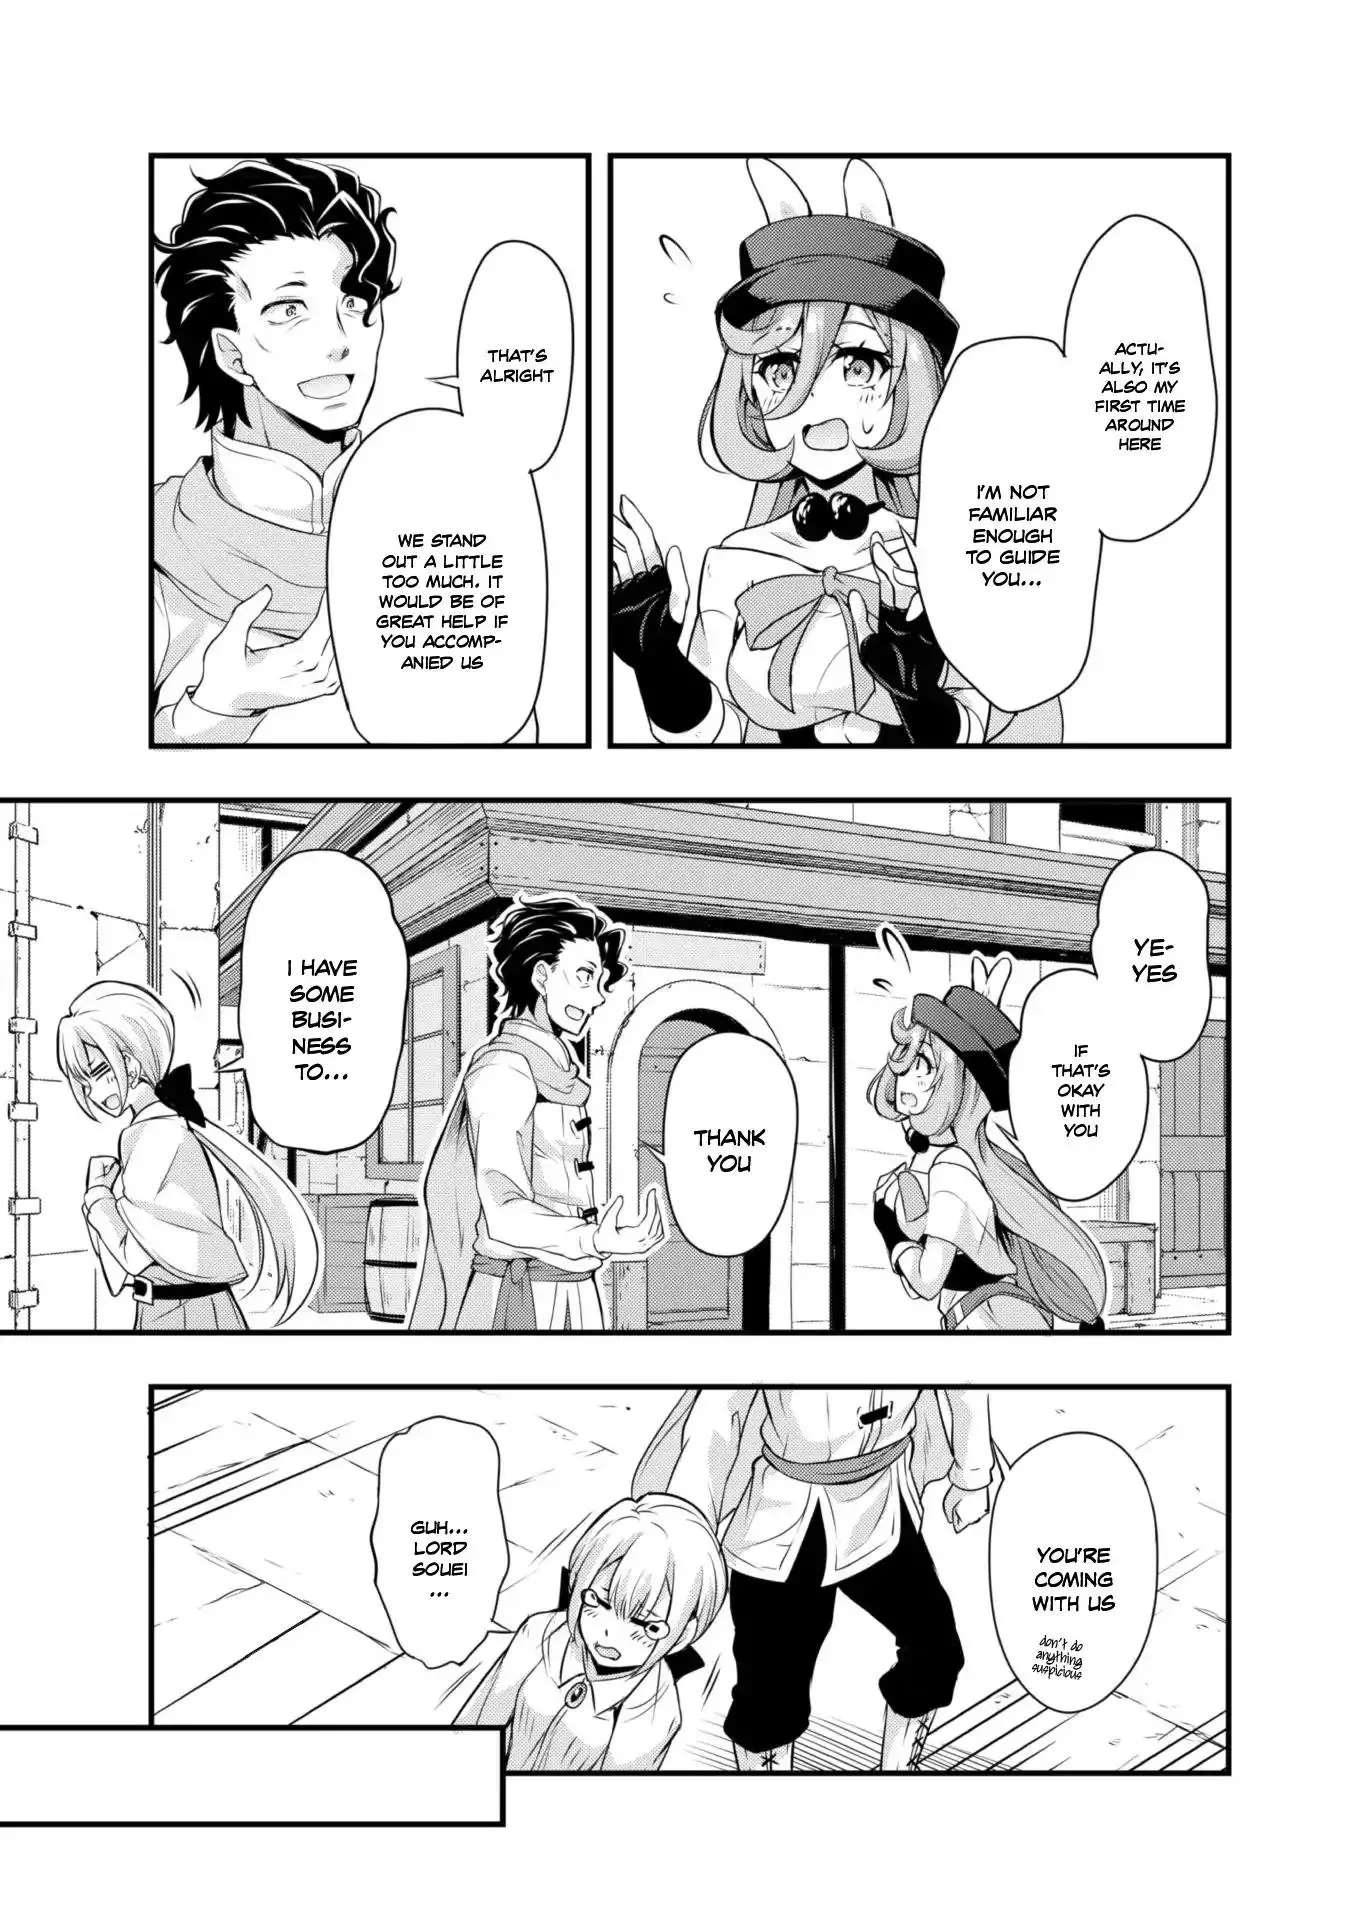 Tensei Shitara Slime Datta Ken: The Ways of Strolling in the Demon Country - 11 page 10